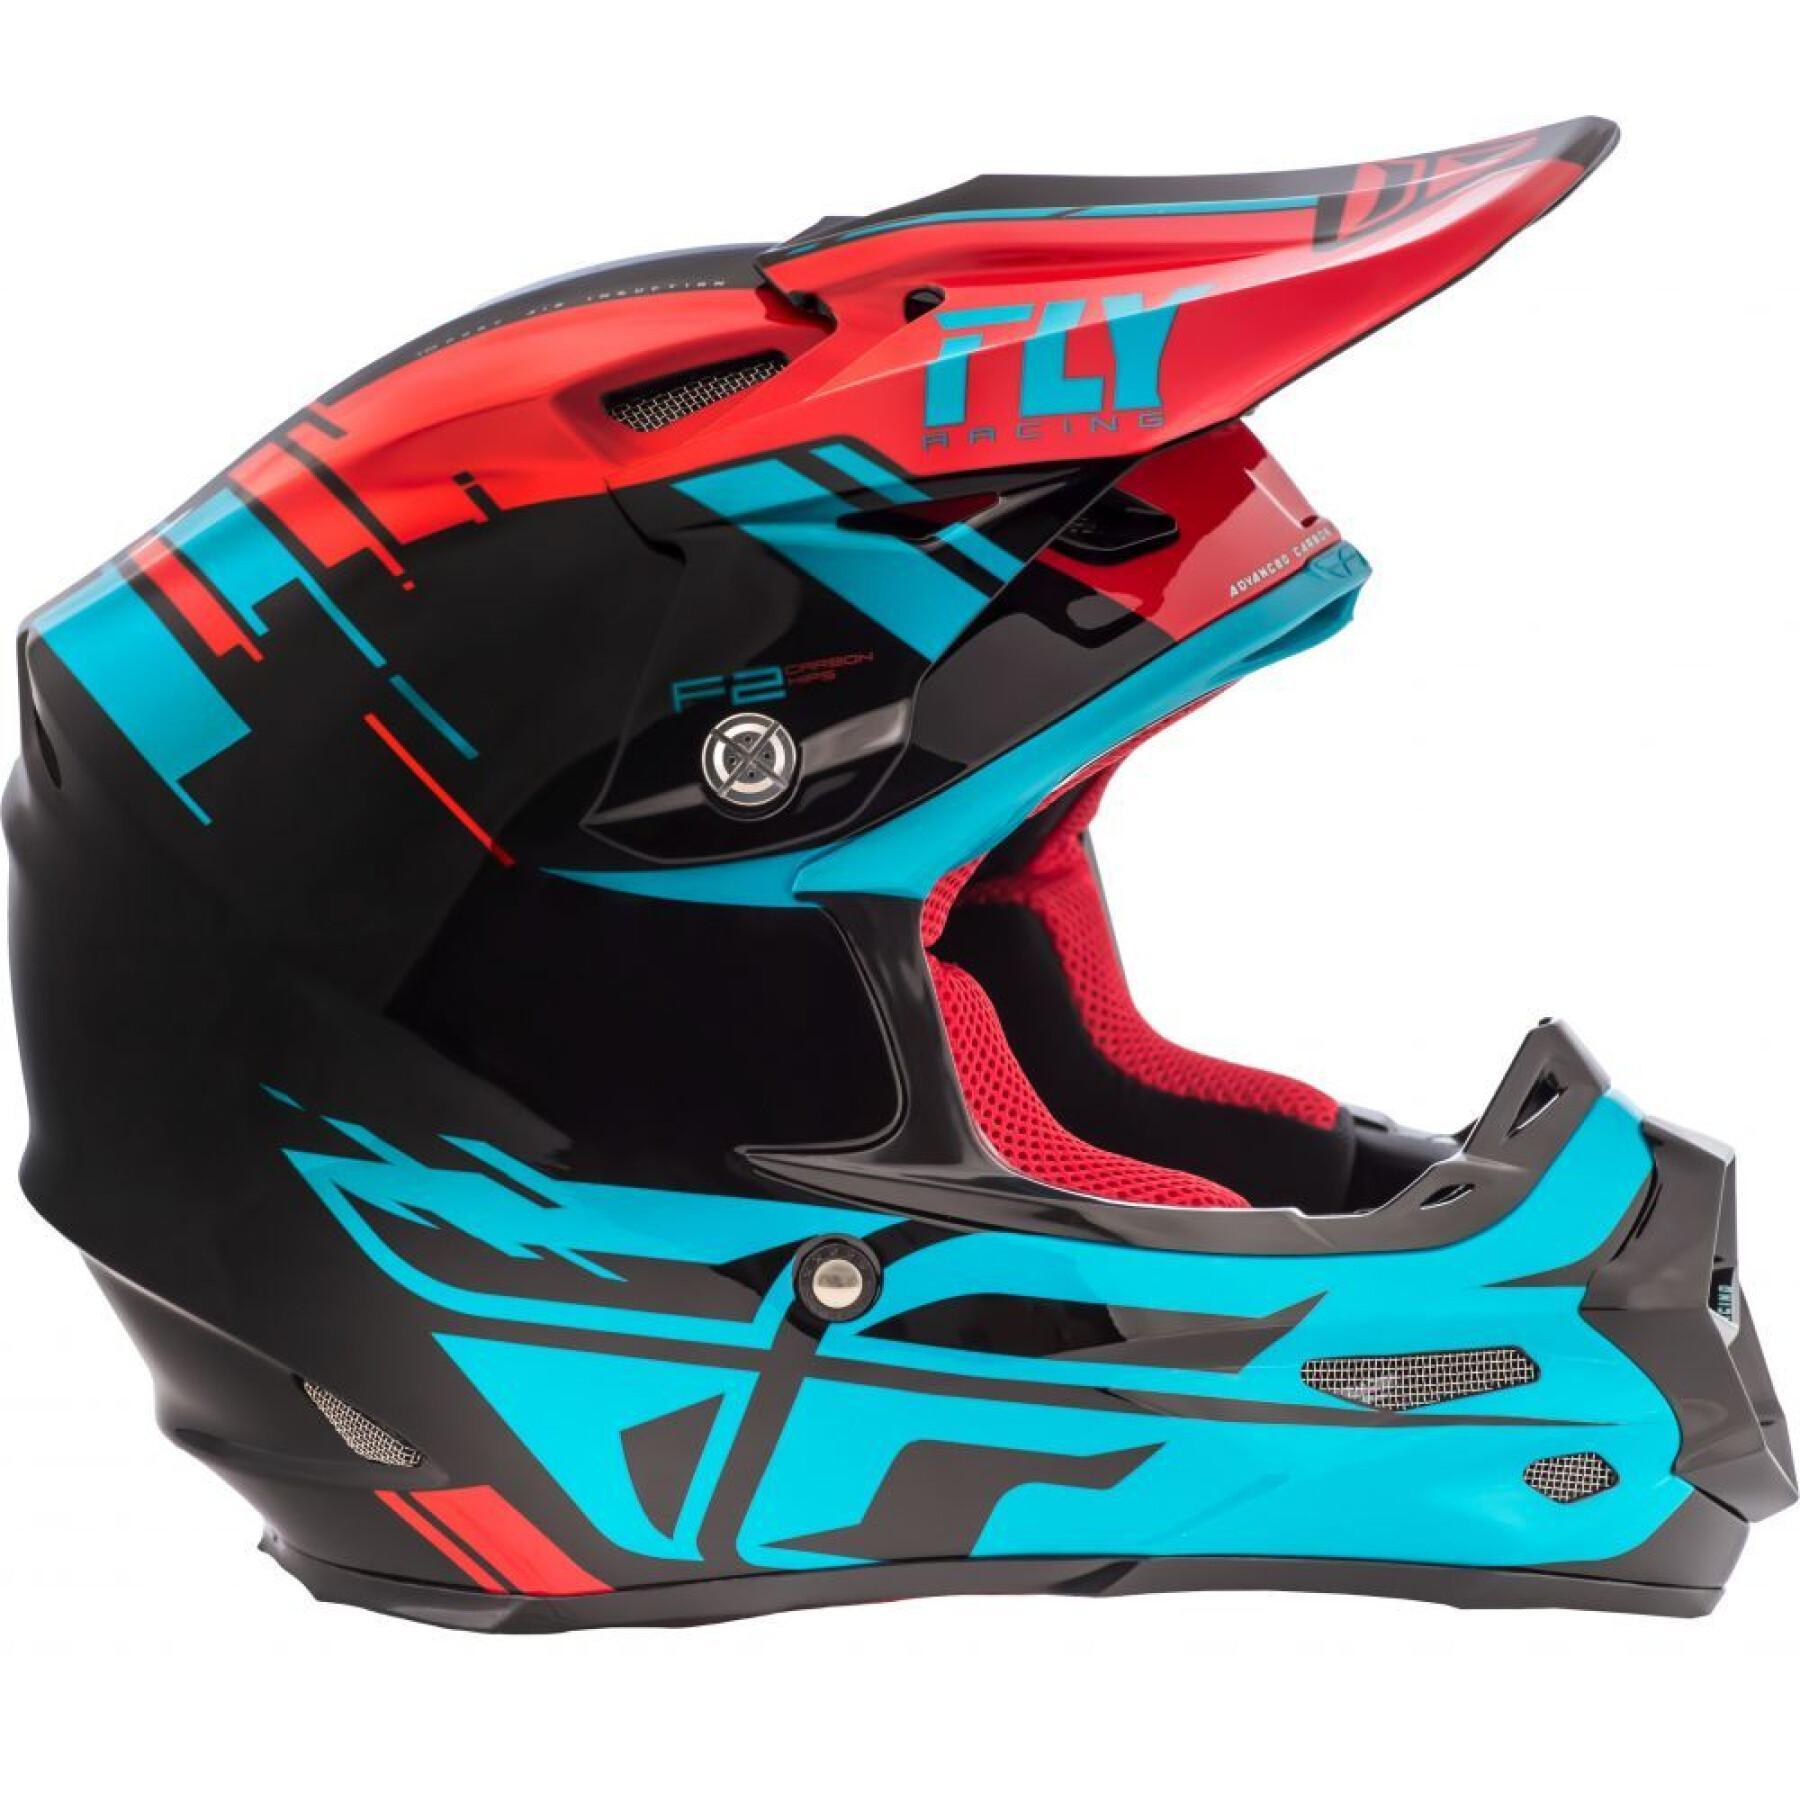 Casco da moto Fly Racing F2 Carbon 2018 Forge Mips